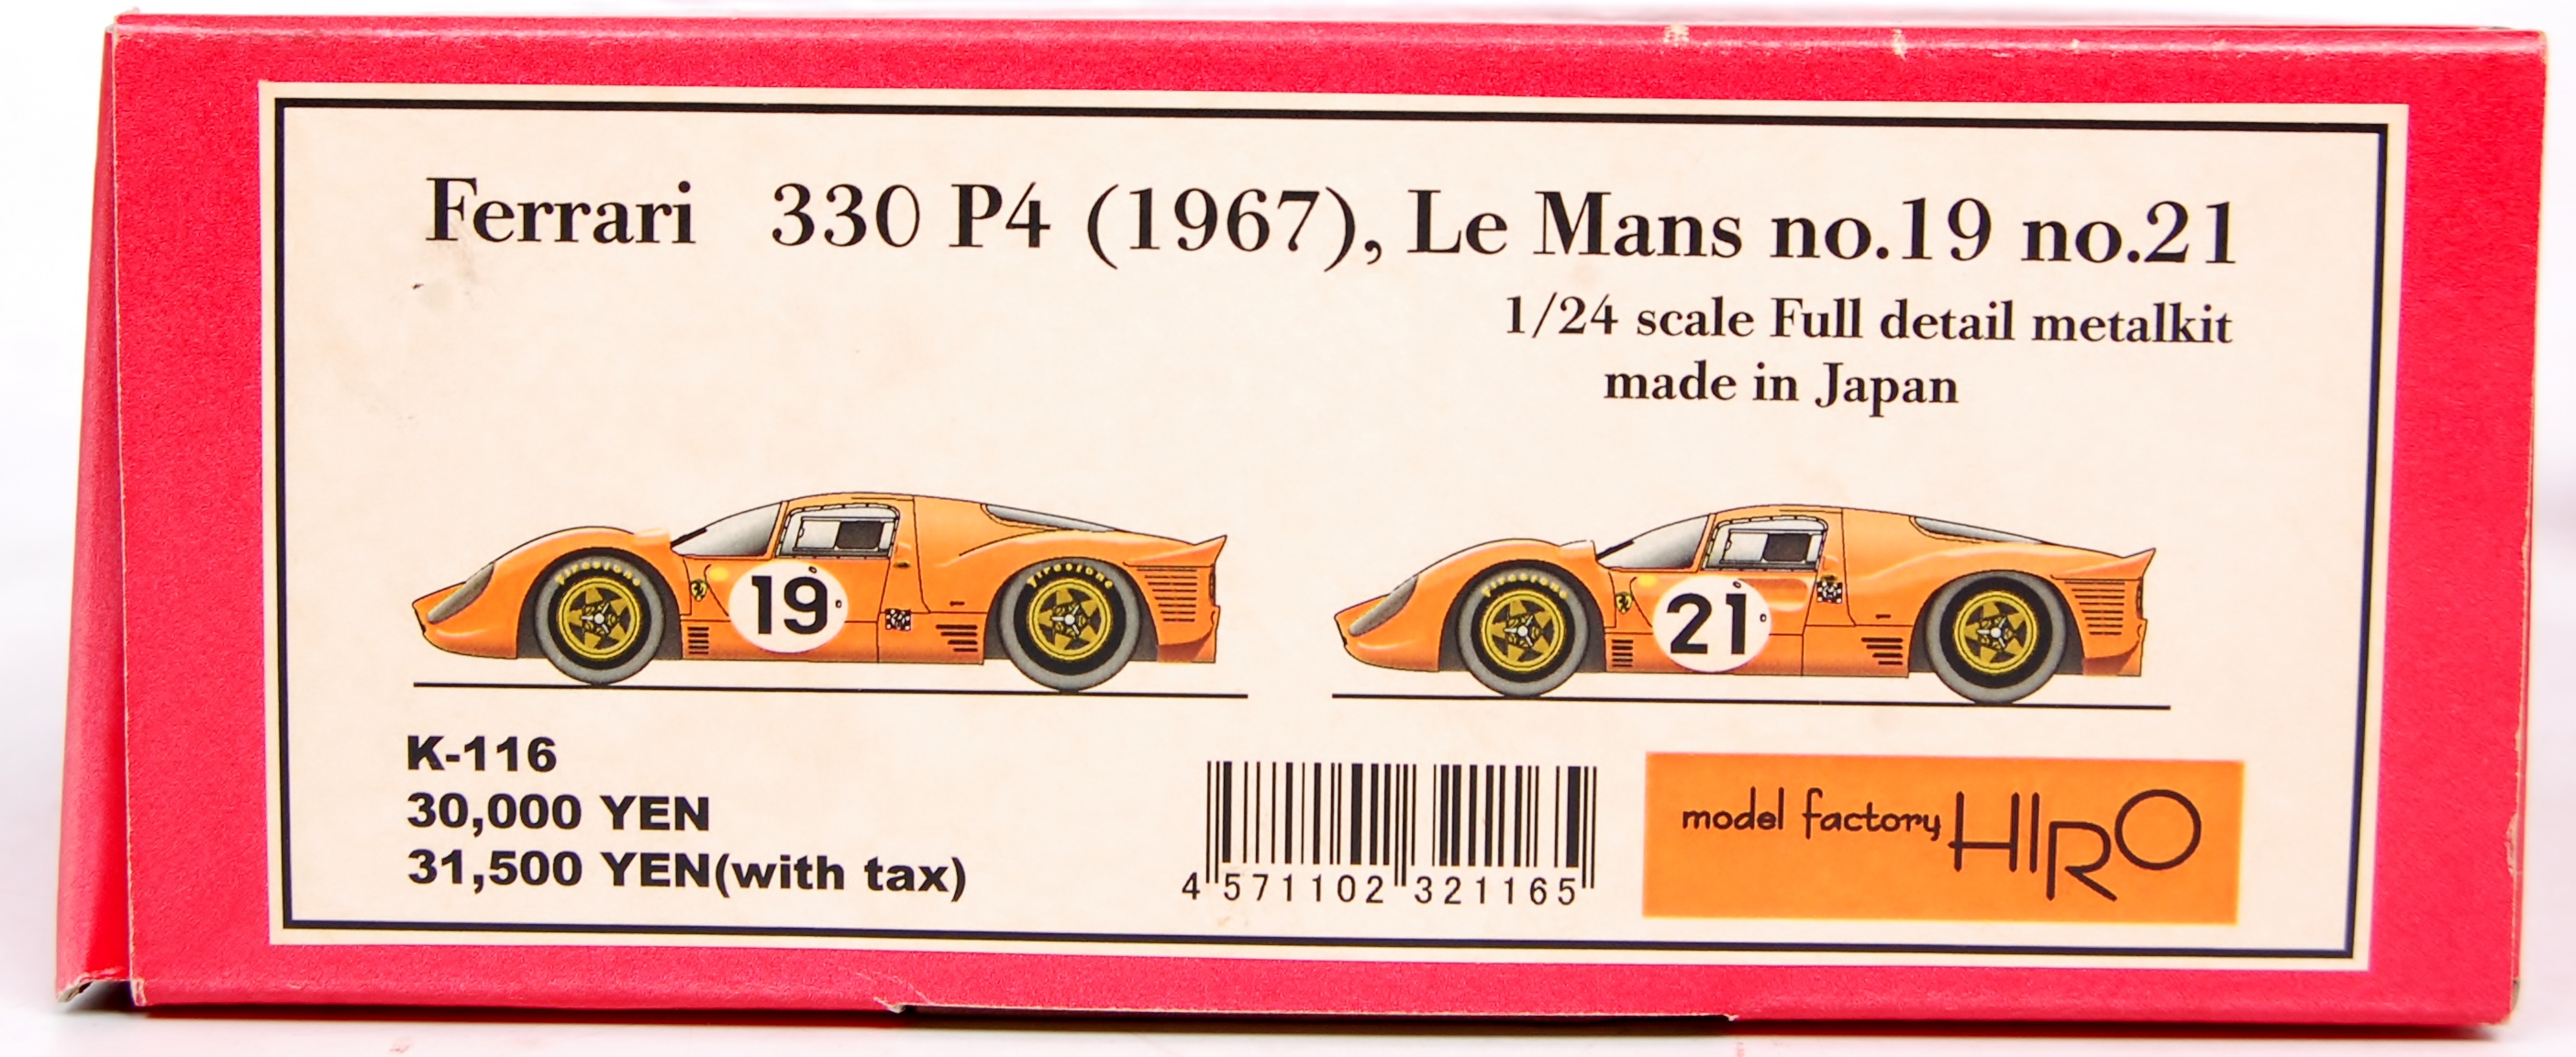 Model Factory Hiro of Japan, 1/24th scale white metal kit for a Ferrari 330 P4 (1967), - Image 2 of 2